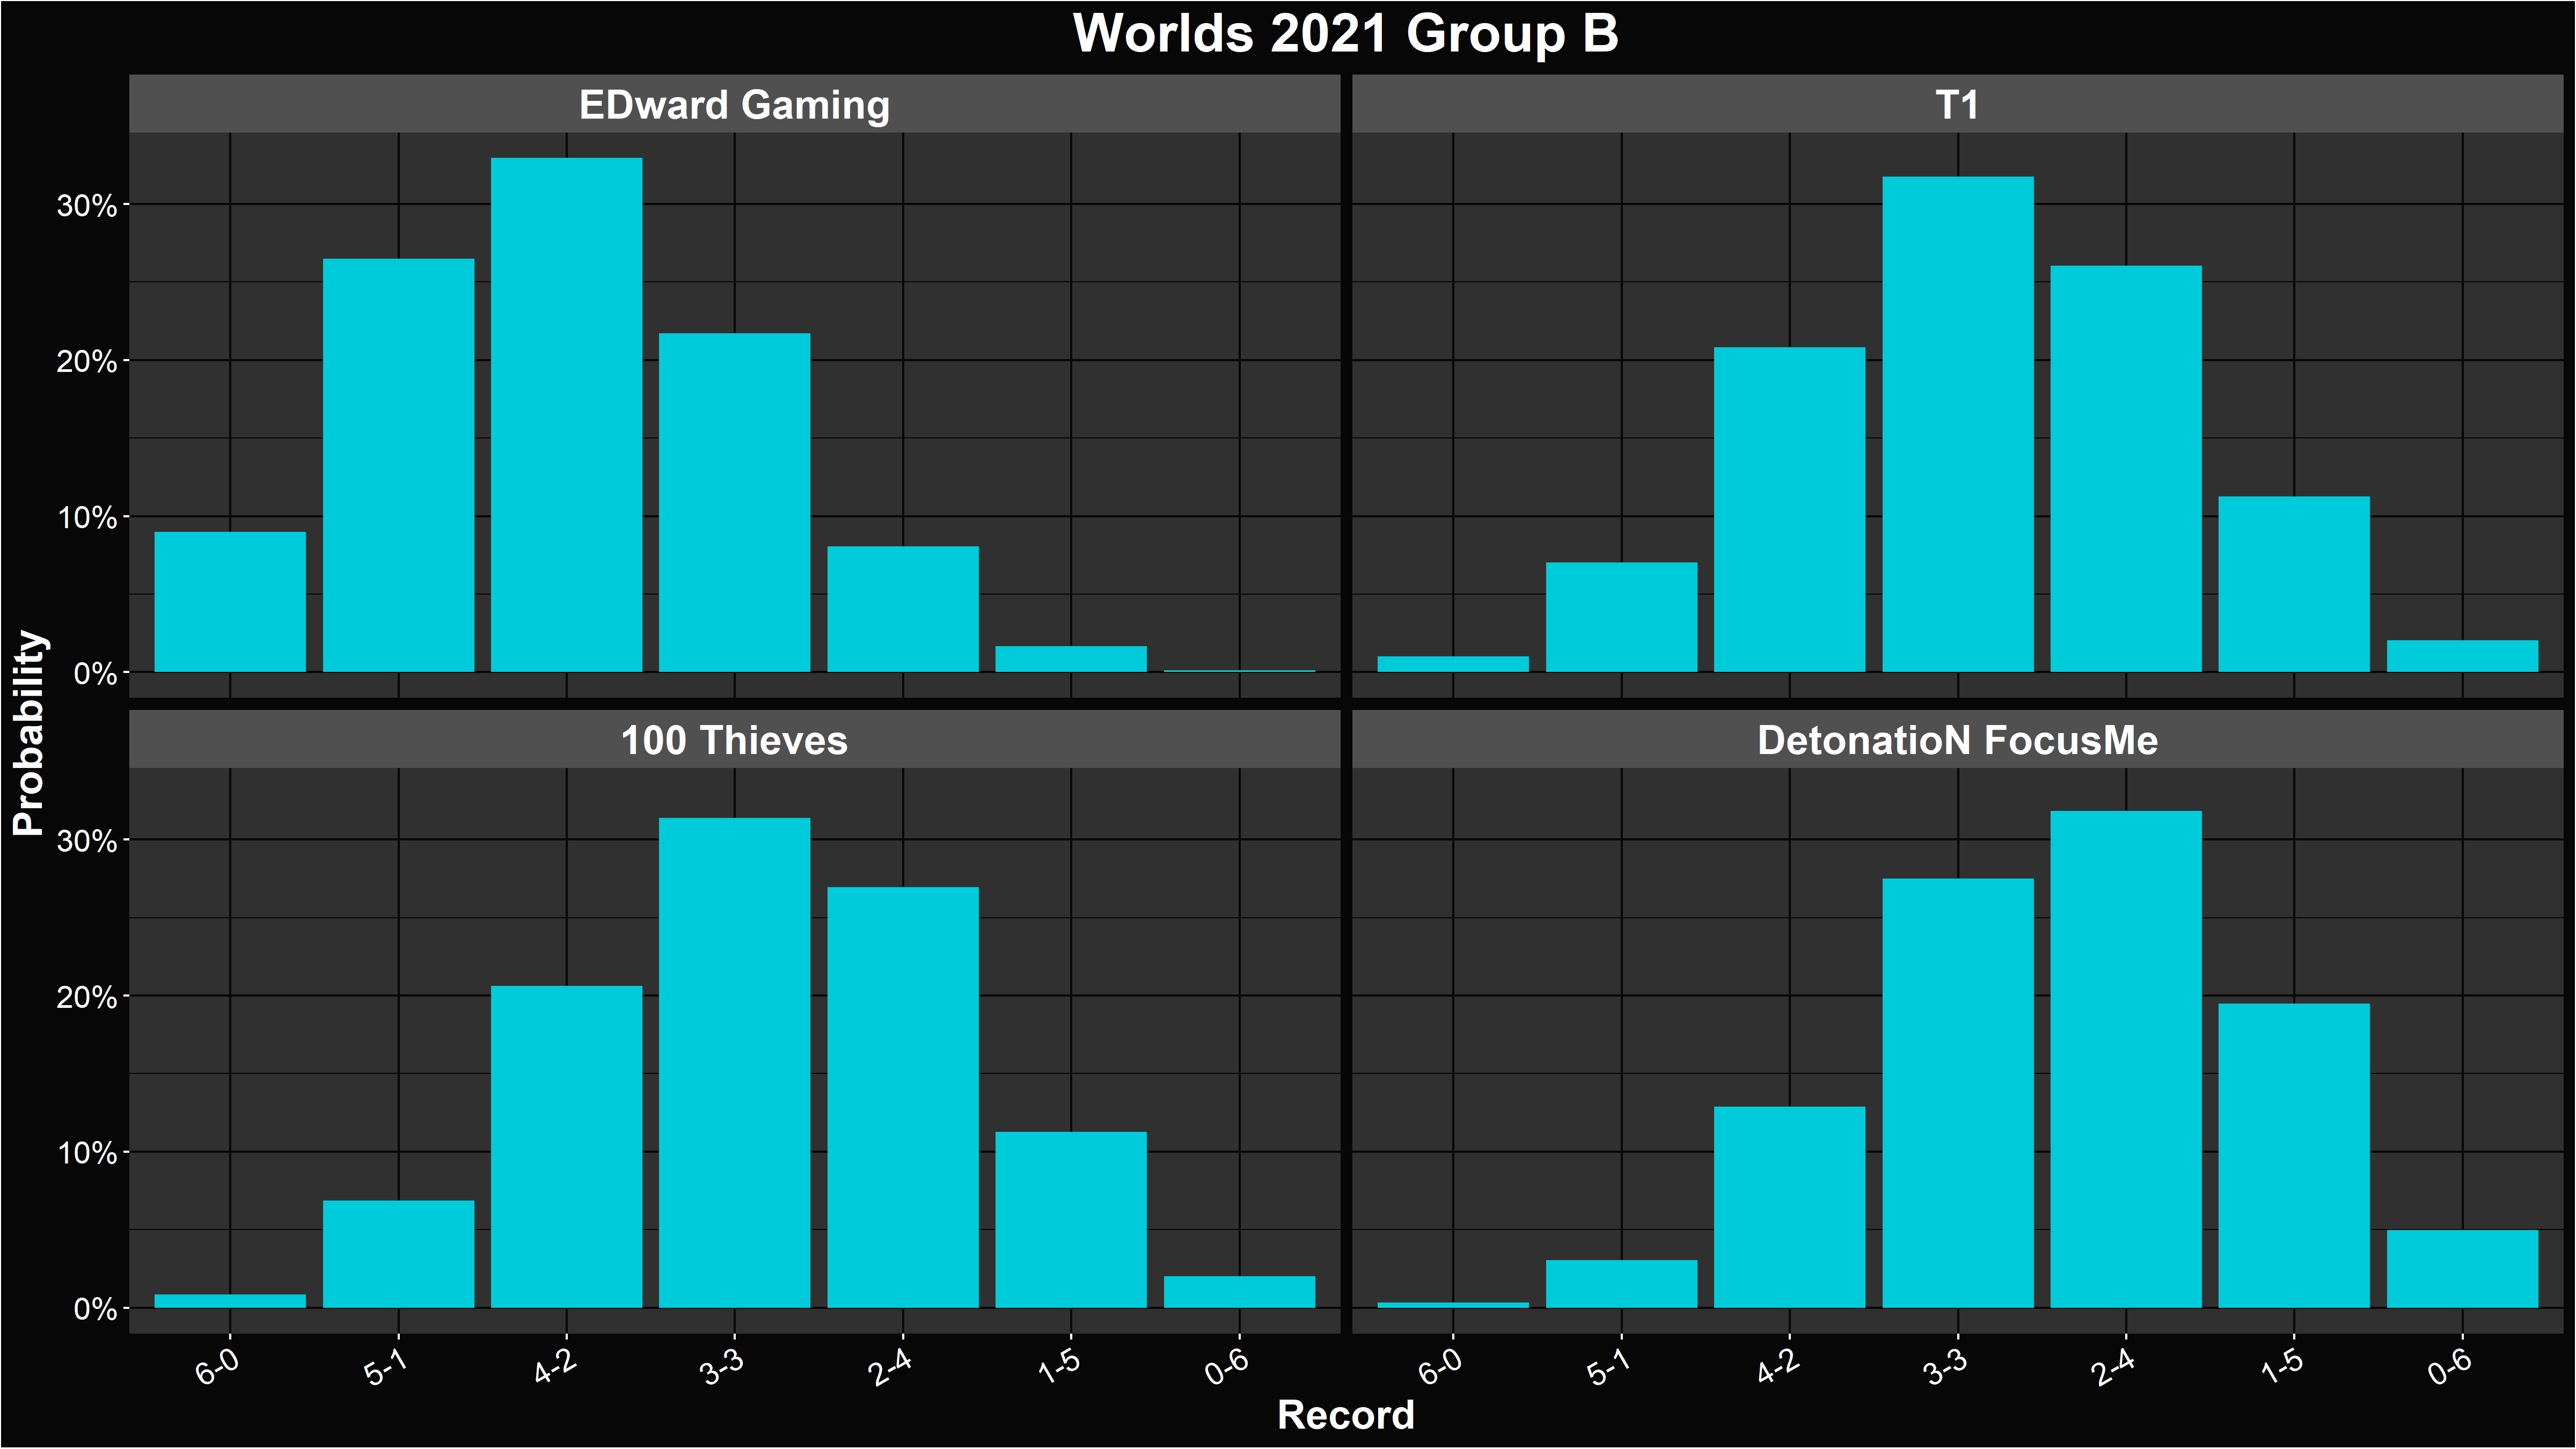 Alacrity's LoL Worlds 2021 Group B Record Distribution